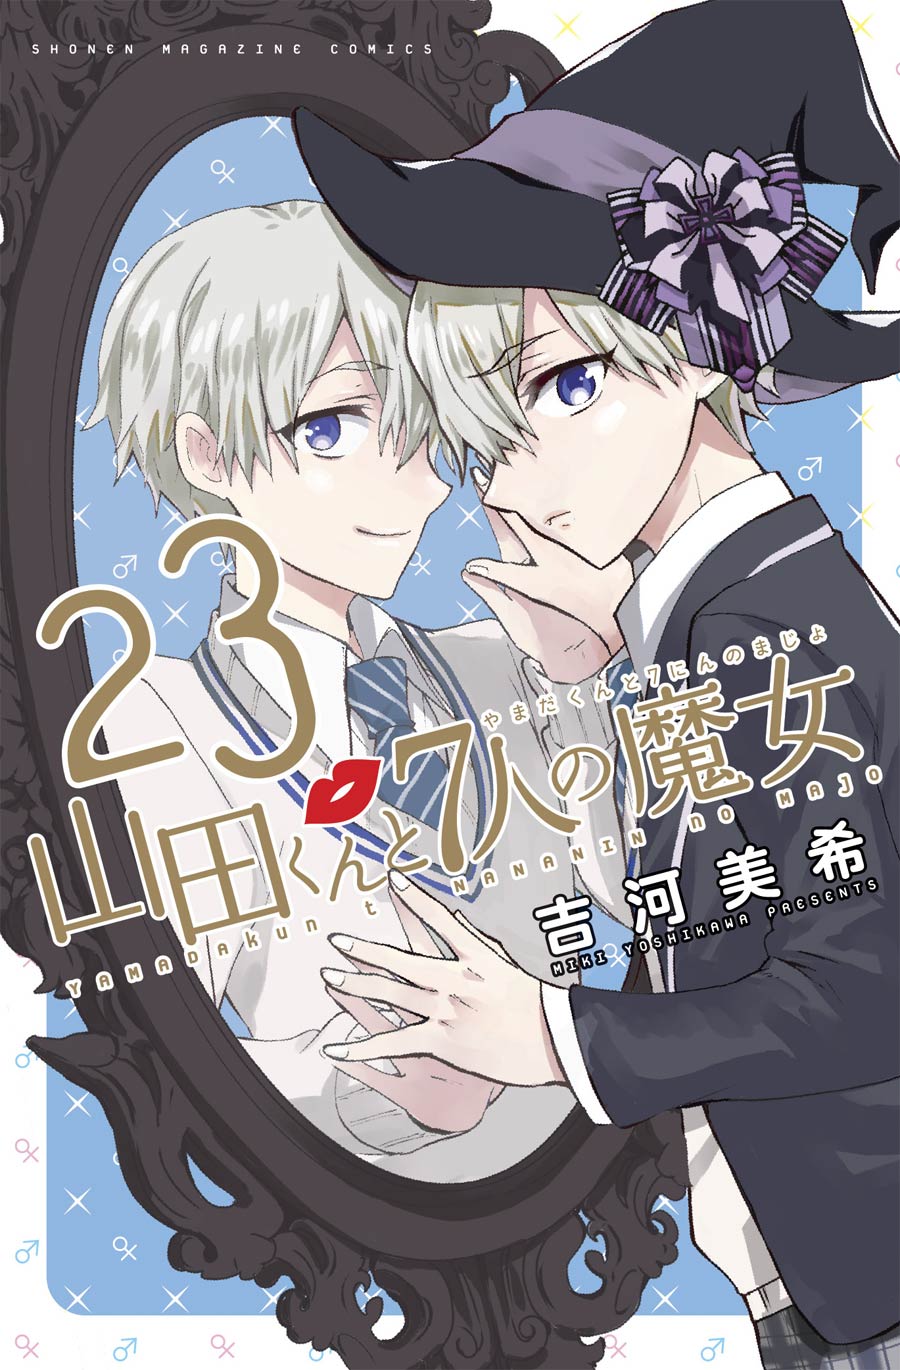 Yamada-Kun And The Seven Witches Vol 20 Parts 23 & 24 GN